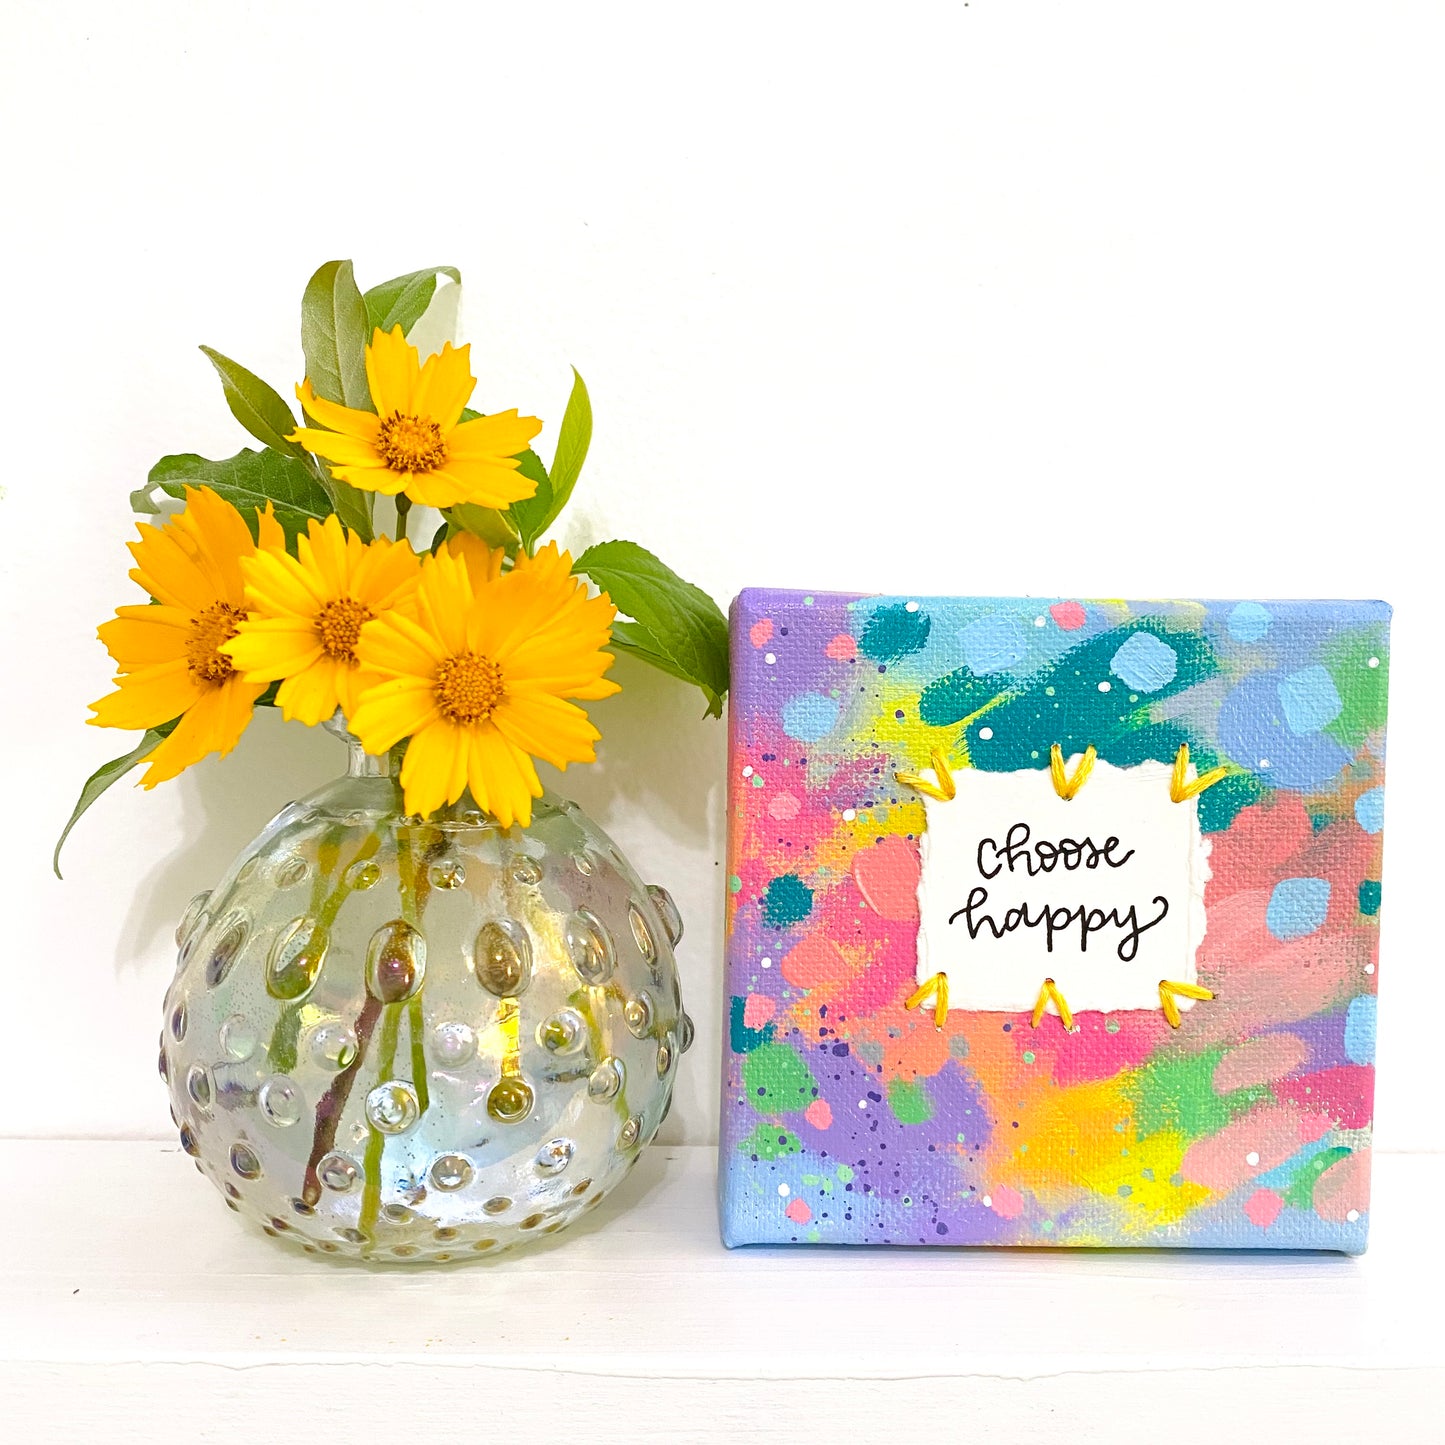 Choose Happy 4x4 inch original abstract canvas with embroidery thread accents